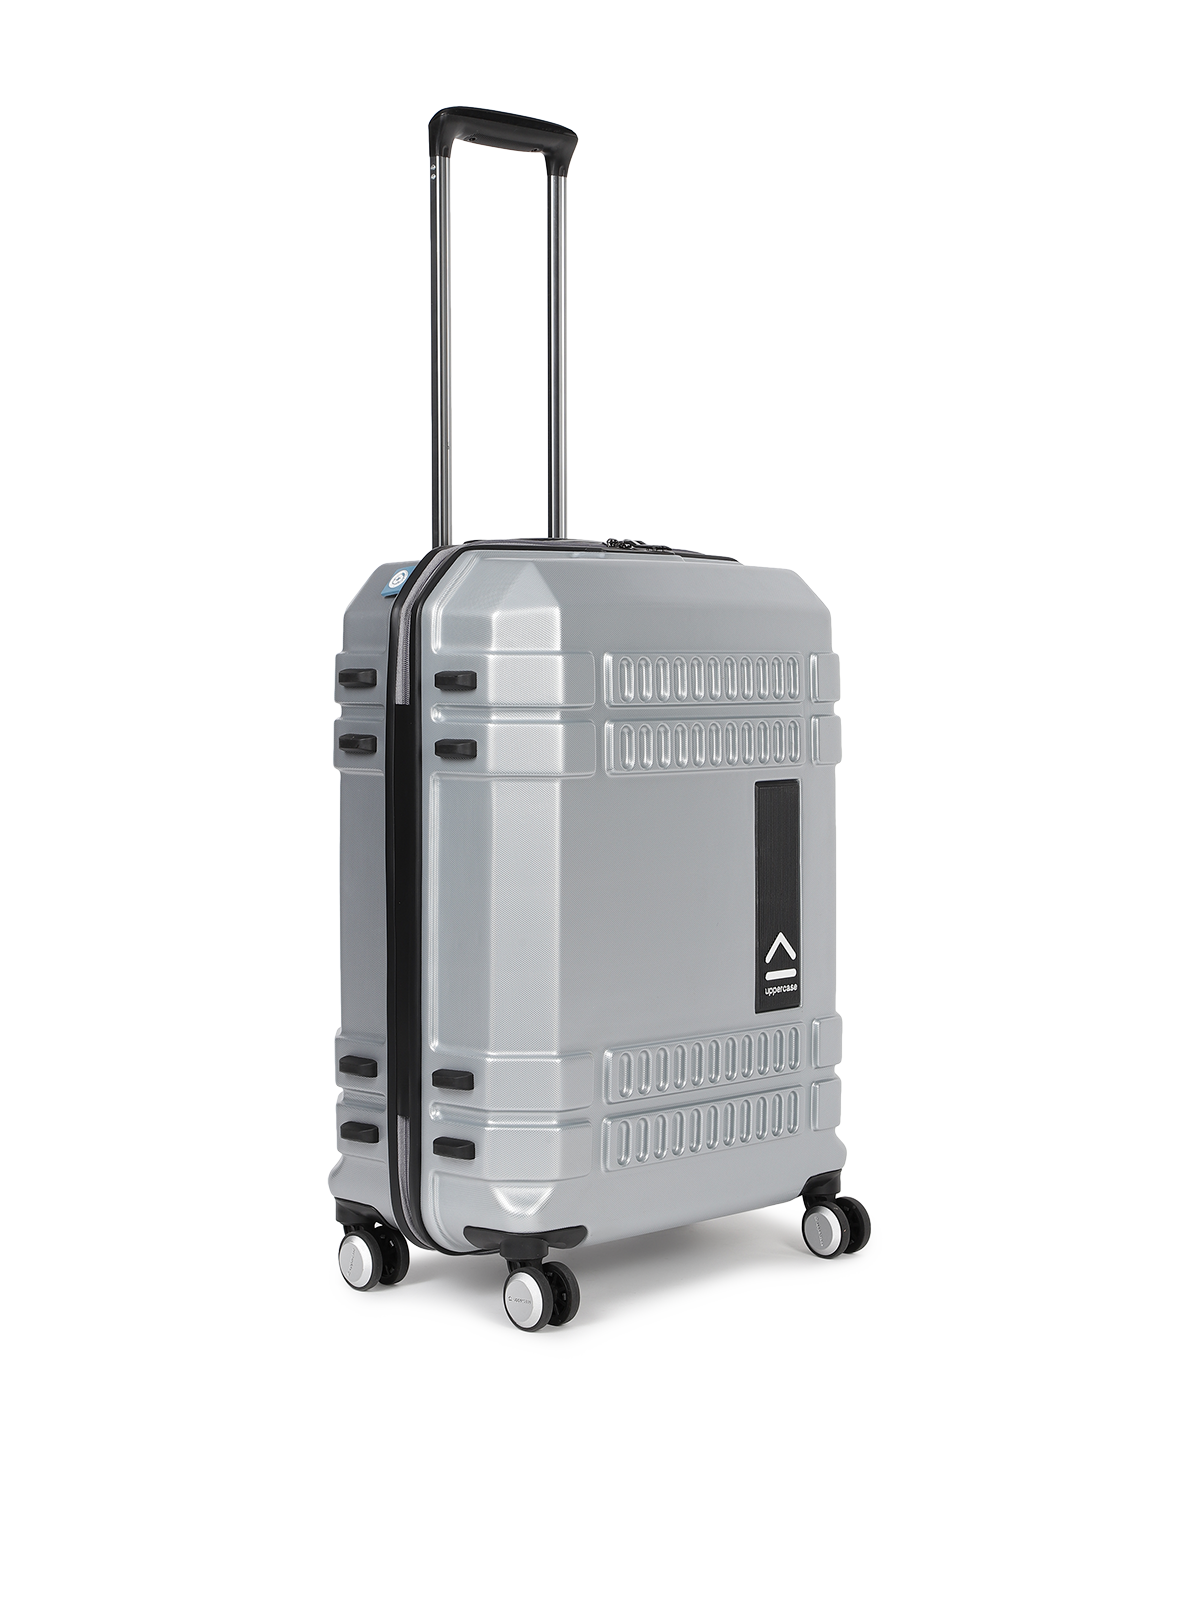 Shop Eco Trolley Bags Online - Stylish Check-in Luggage